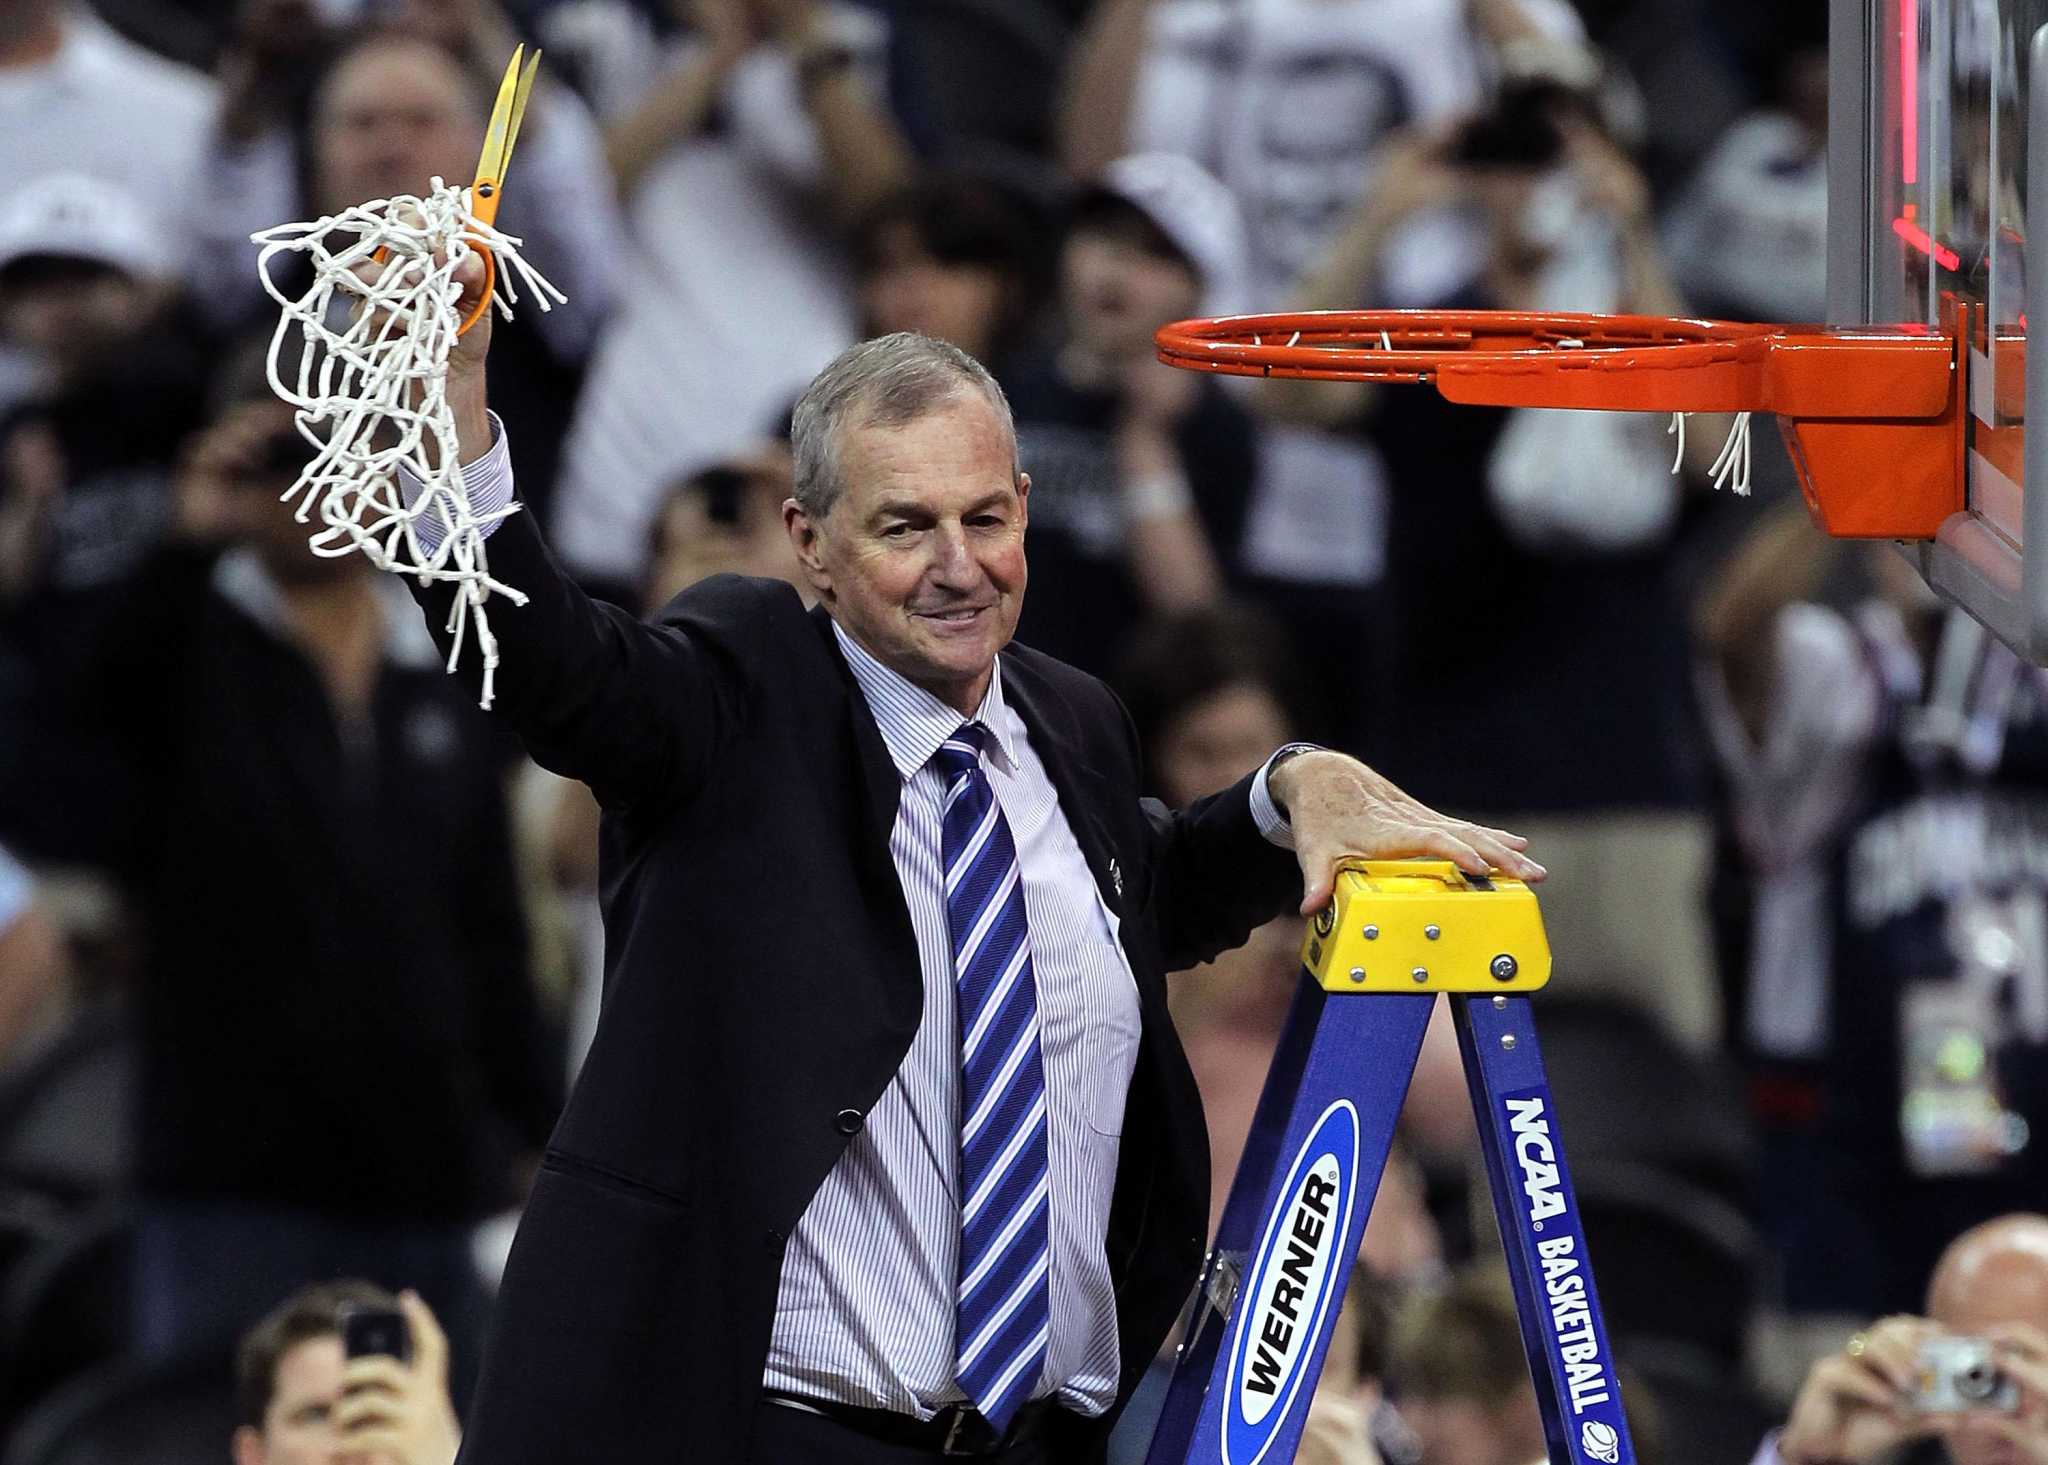 2011 NCAA championship loss to UConn a game Butler fans want to forget